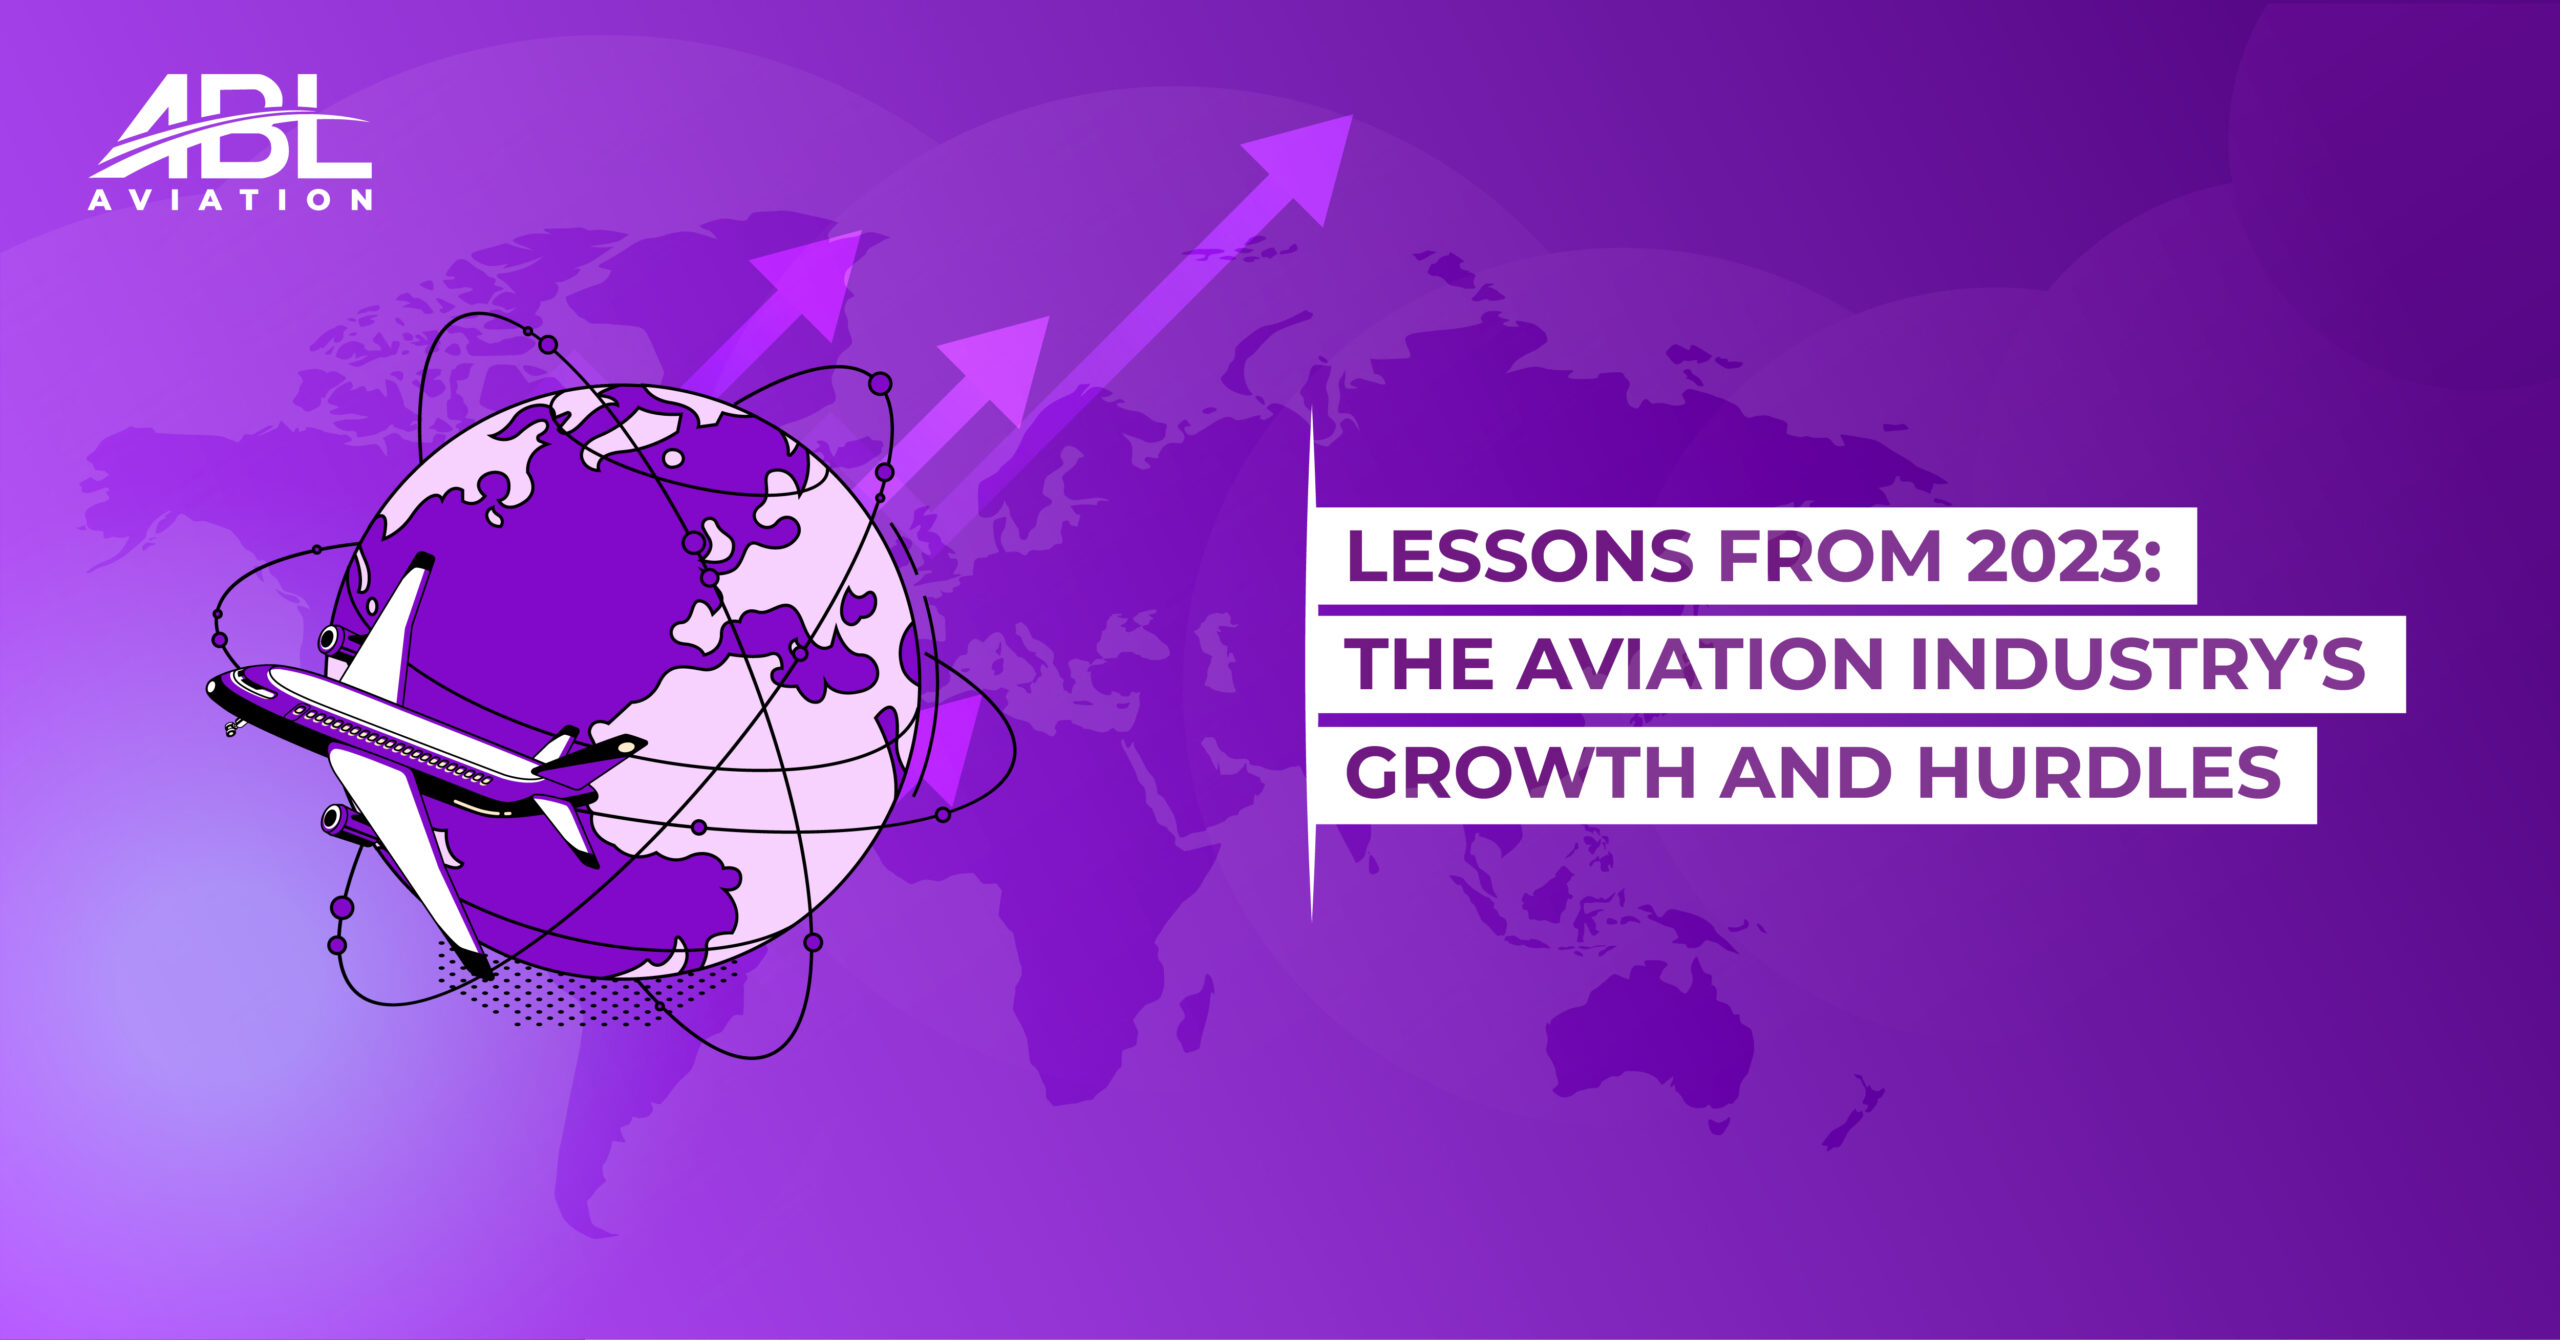 Lessons From 2023: The Aviation Industry’s Growth and Hurdles